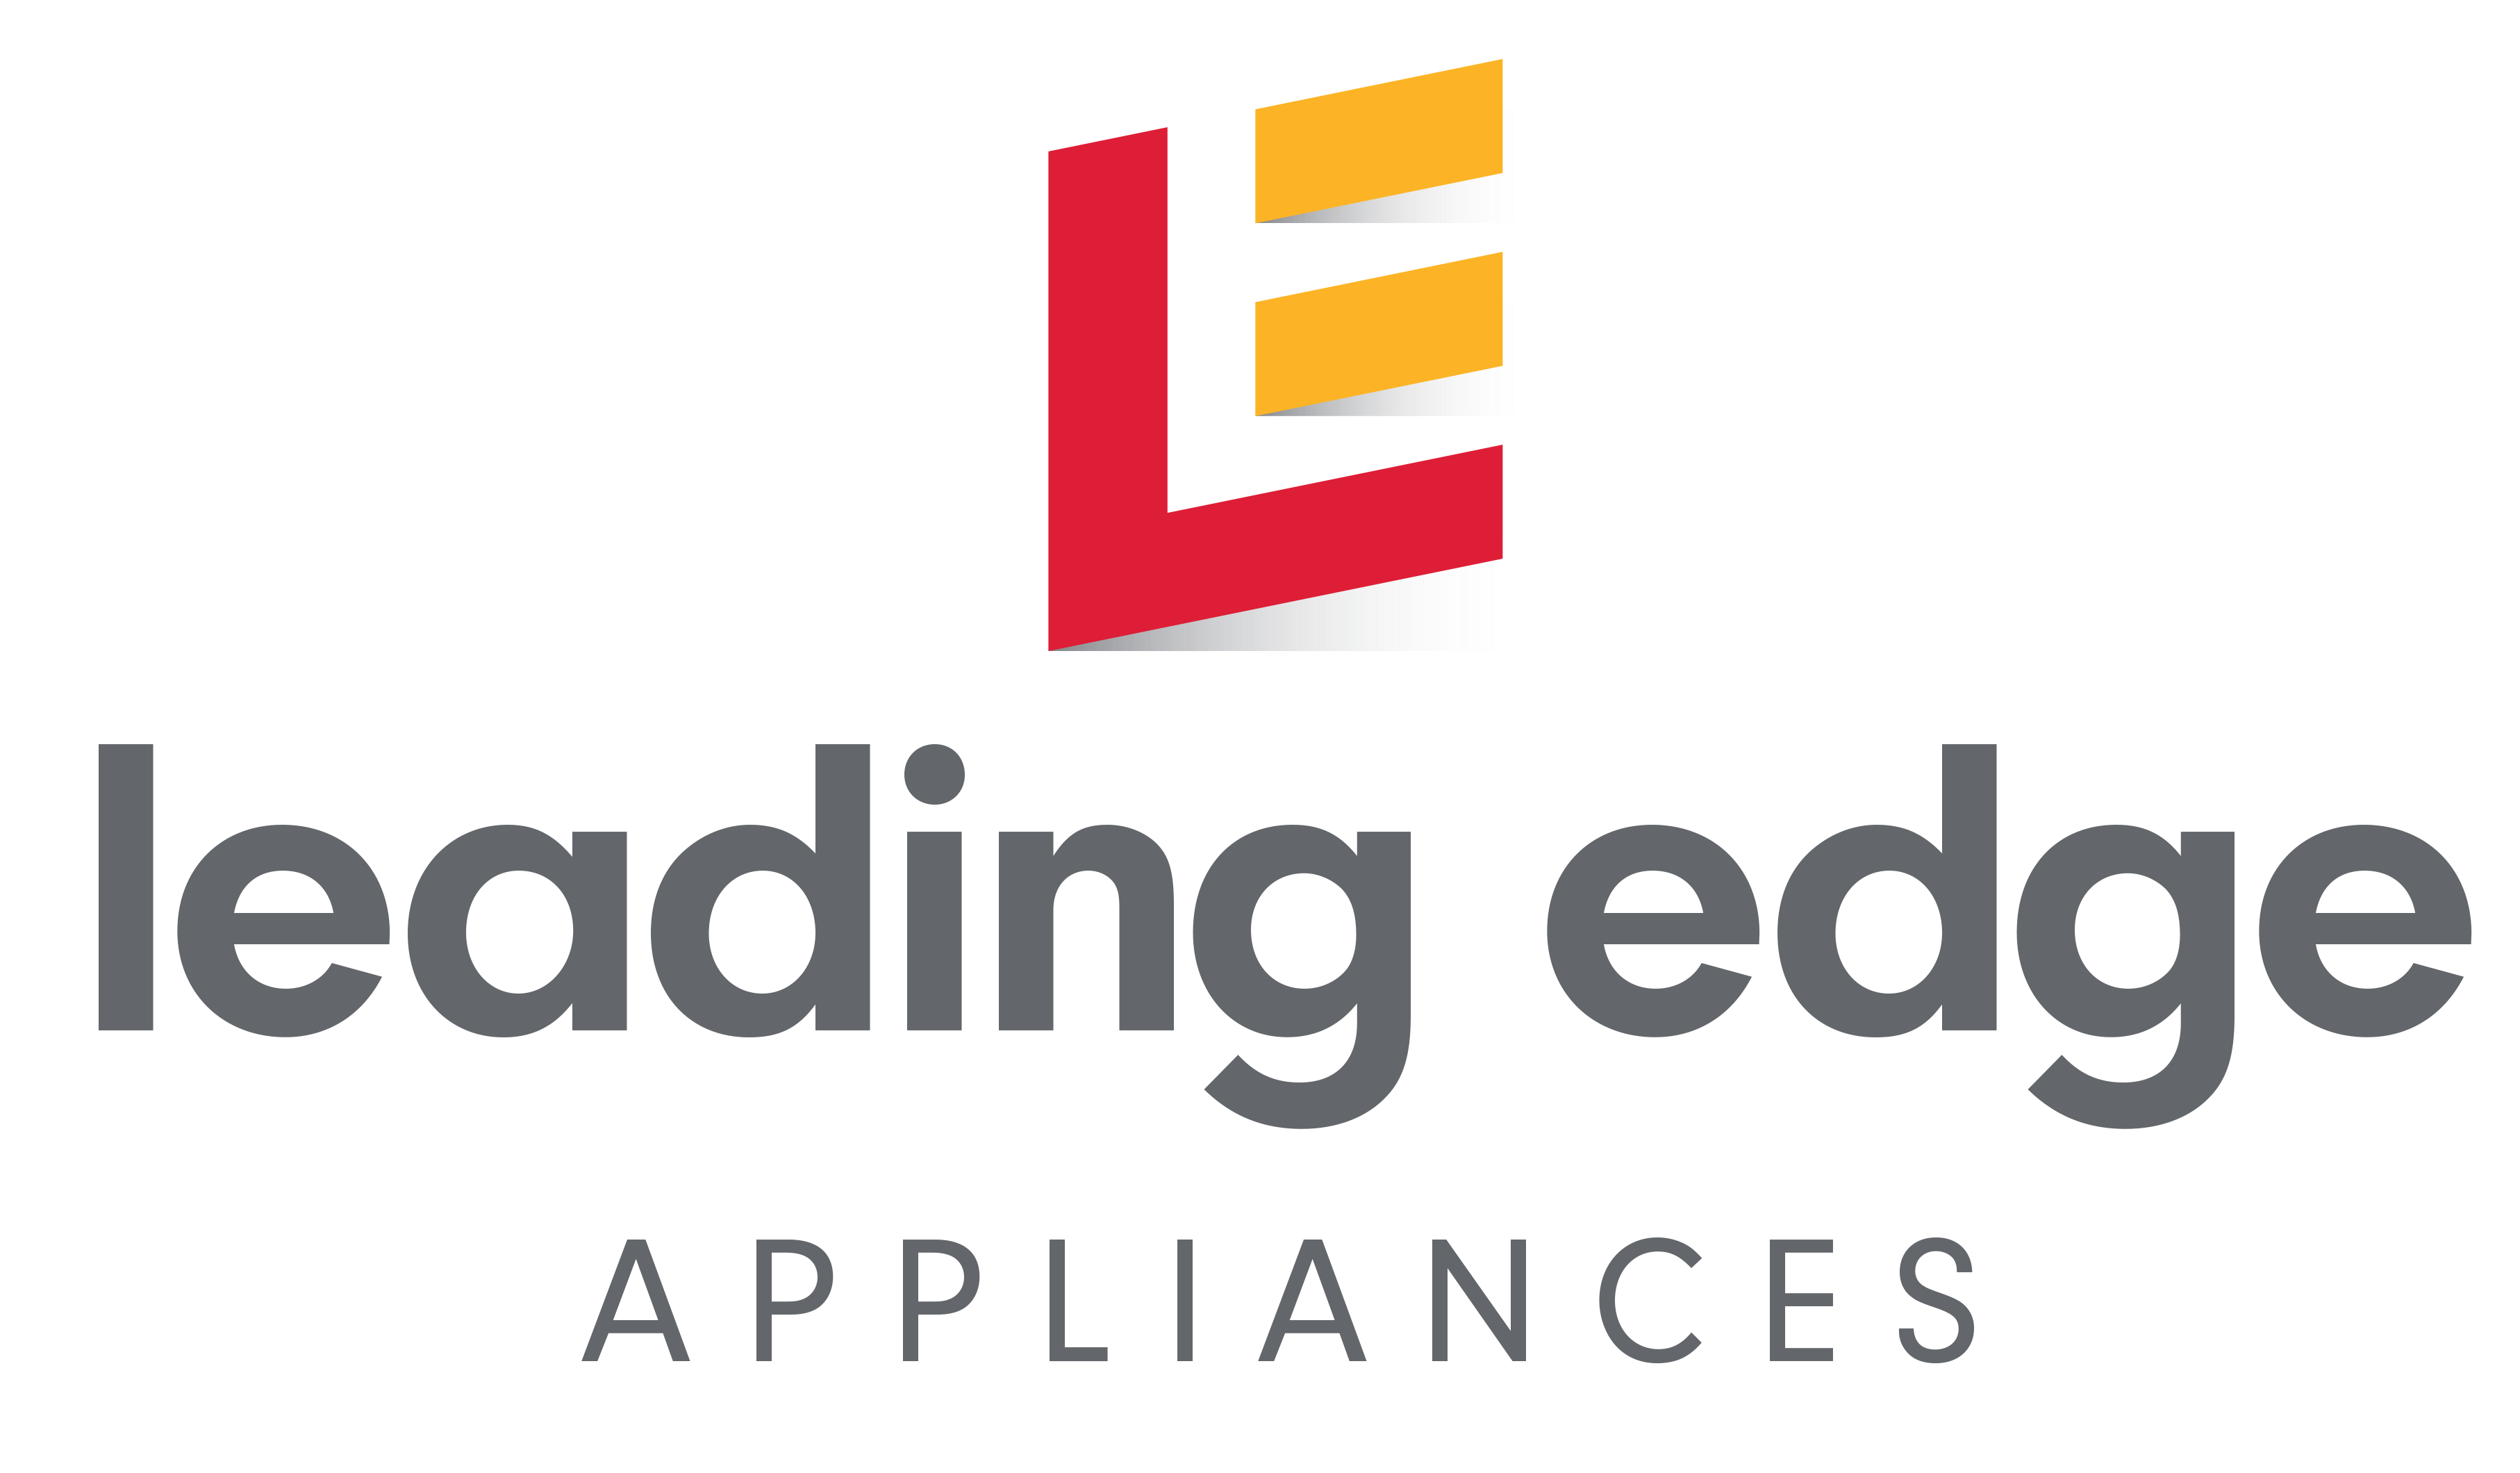 Leading Edge Appliances | Trusted Brands | Free Delivery